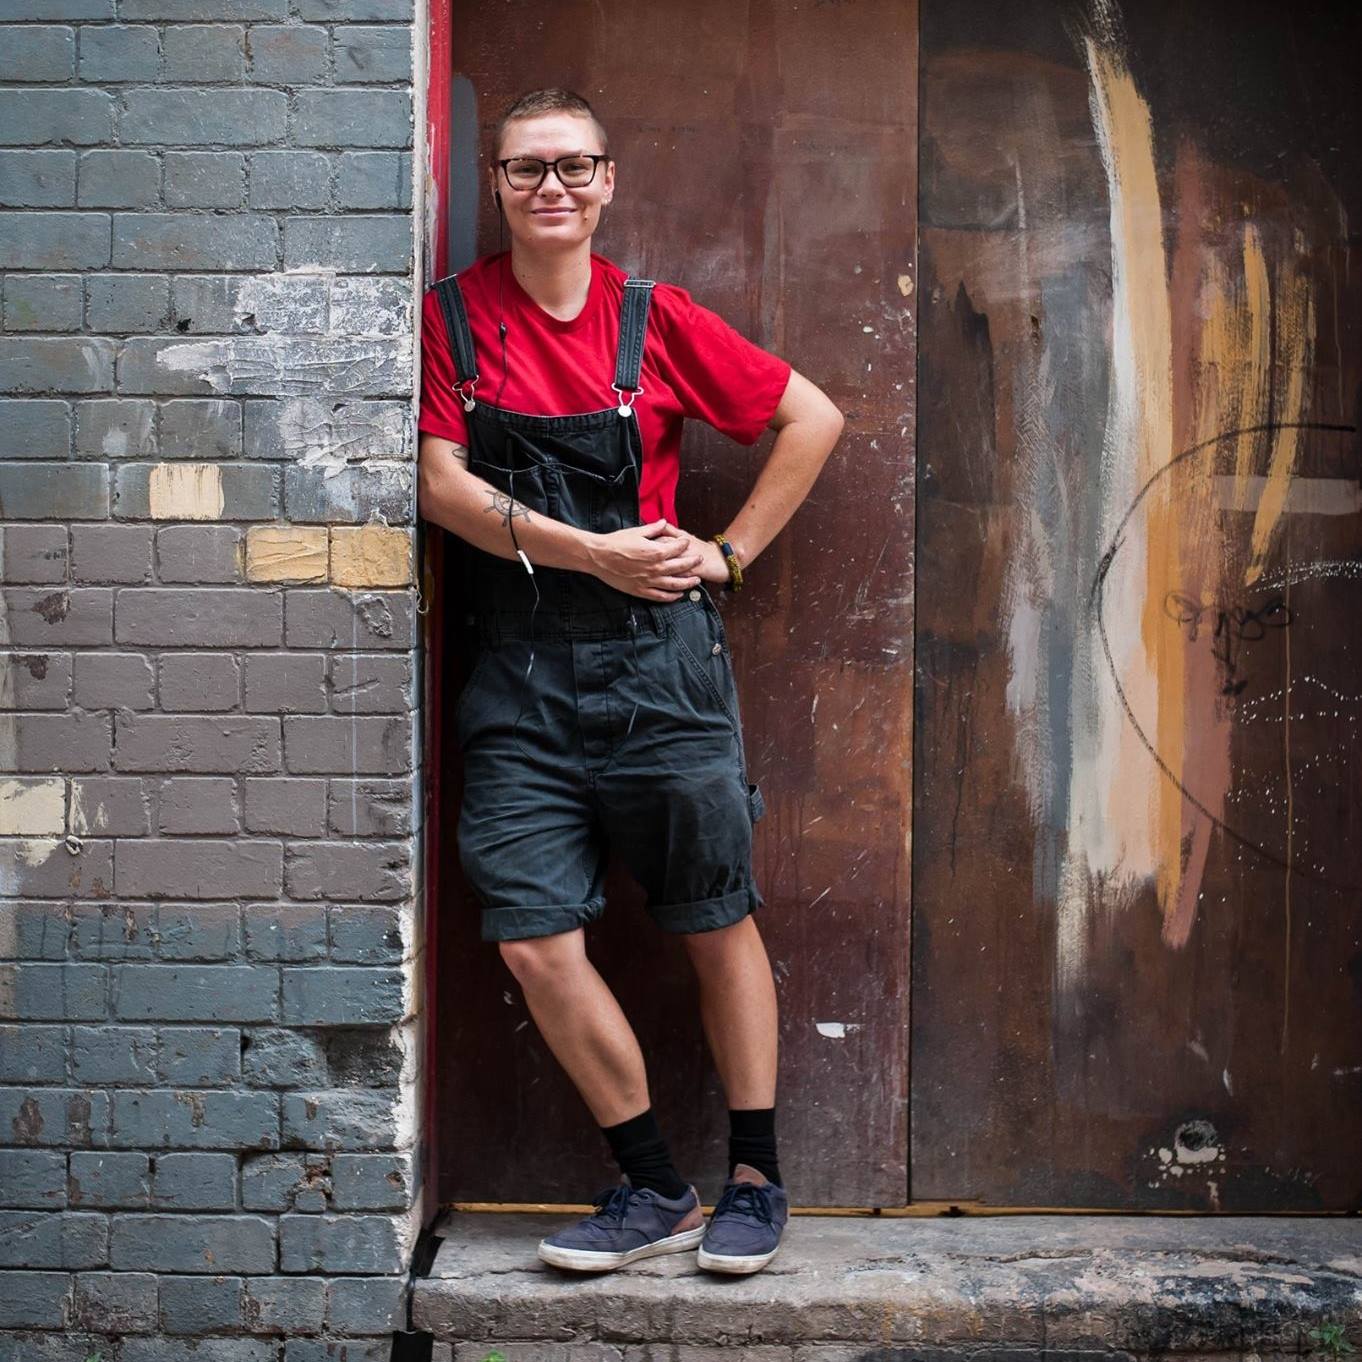 Mack dressed in overall shorts and red t-shirt leaning on a wall in a grungy building